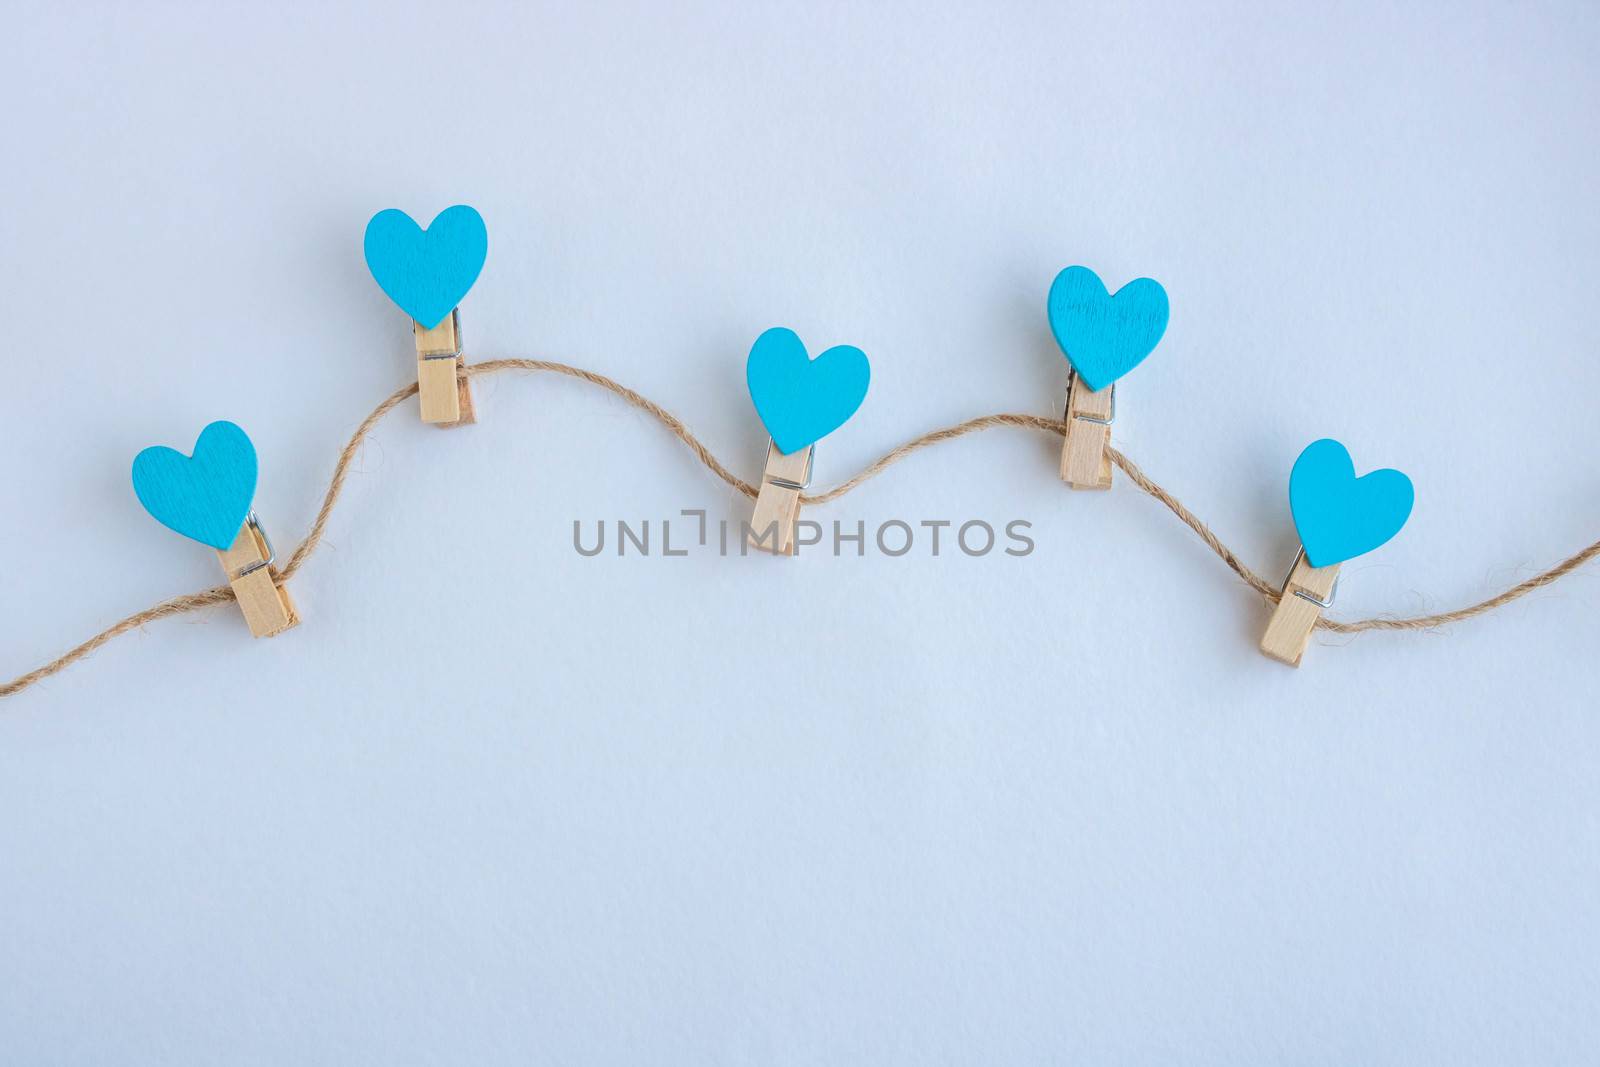 Small clothespins and blue hearts on a string on a white background by lapushka62